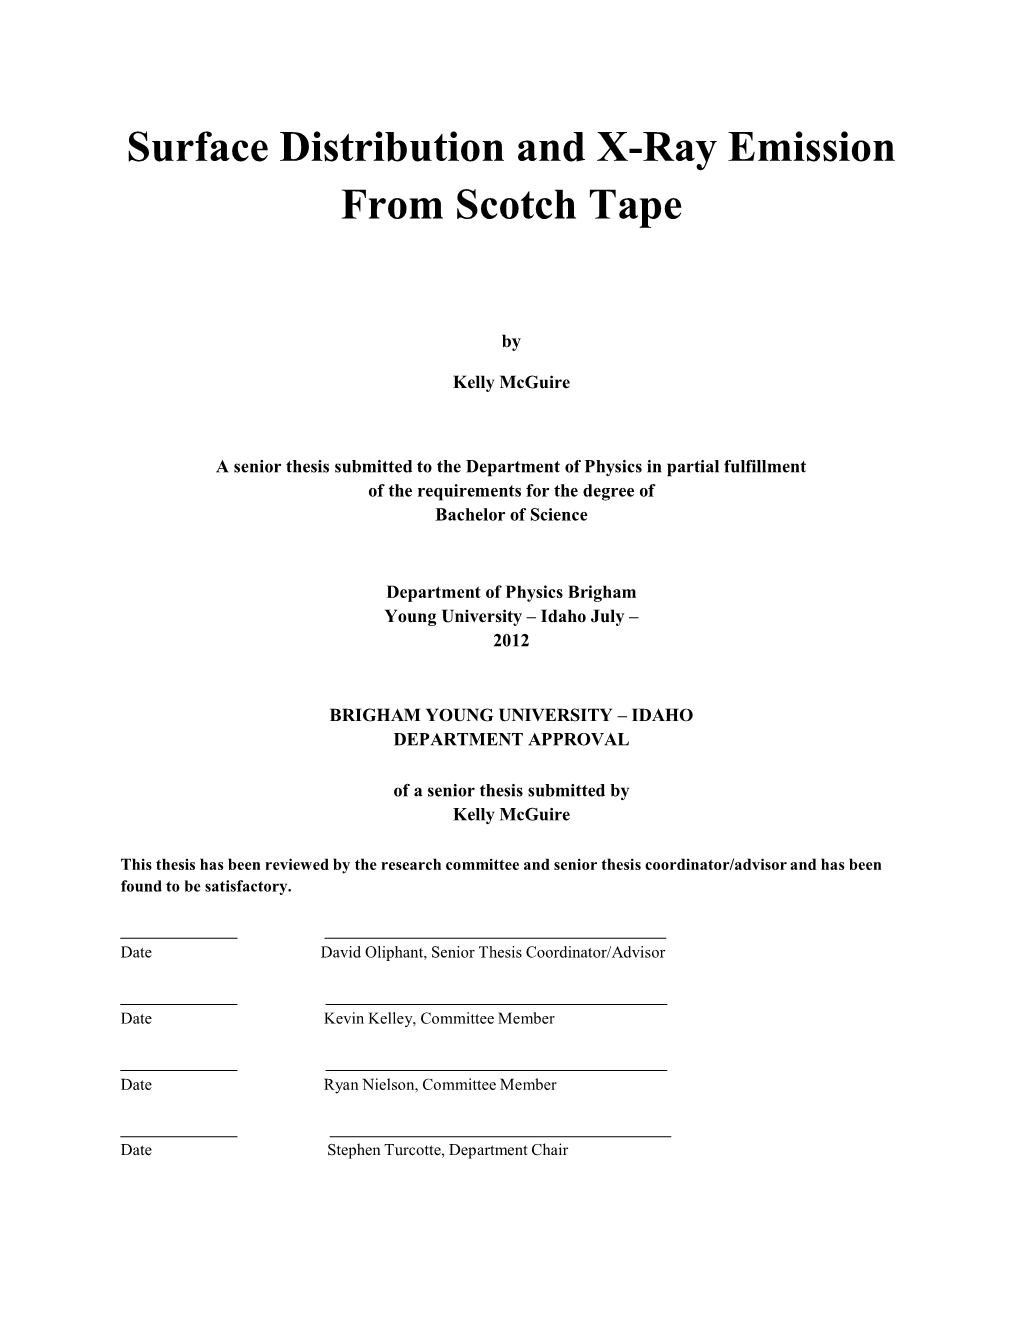 Surface Distribution and X-Ray Emission from Scotch Tape